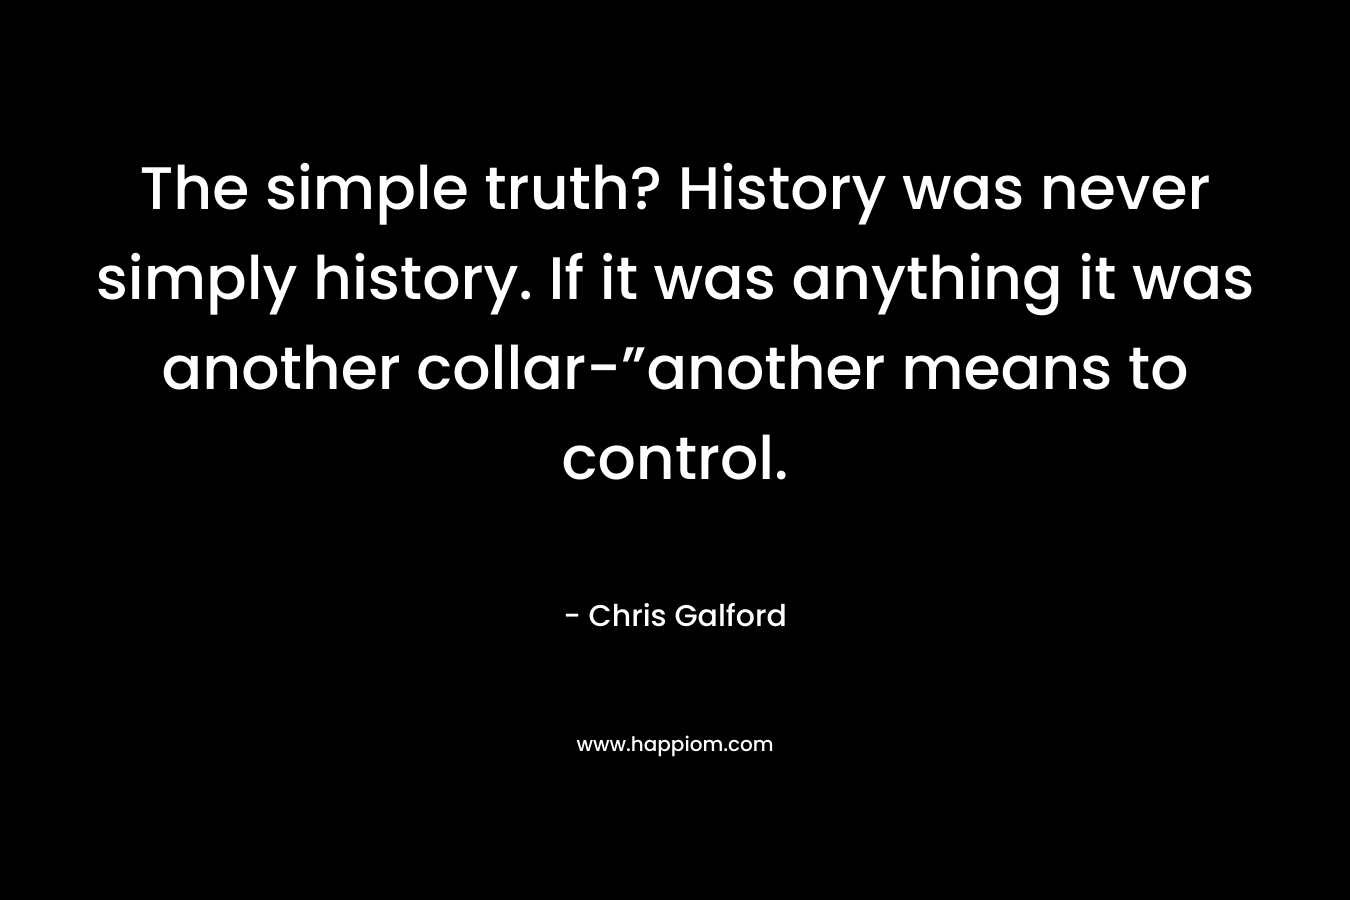 The simple truth? History was never simply history. If it was anything it was another collar-”another means to control. – Chris Galford